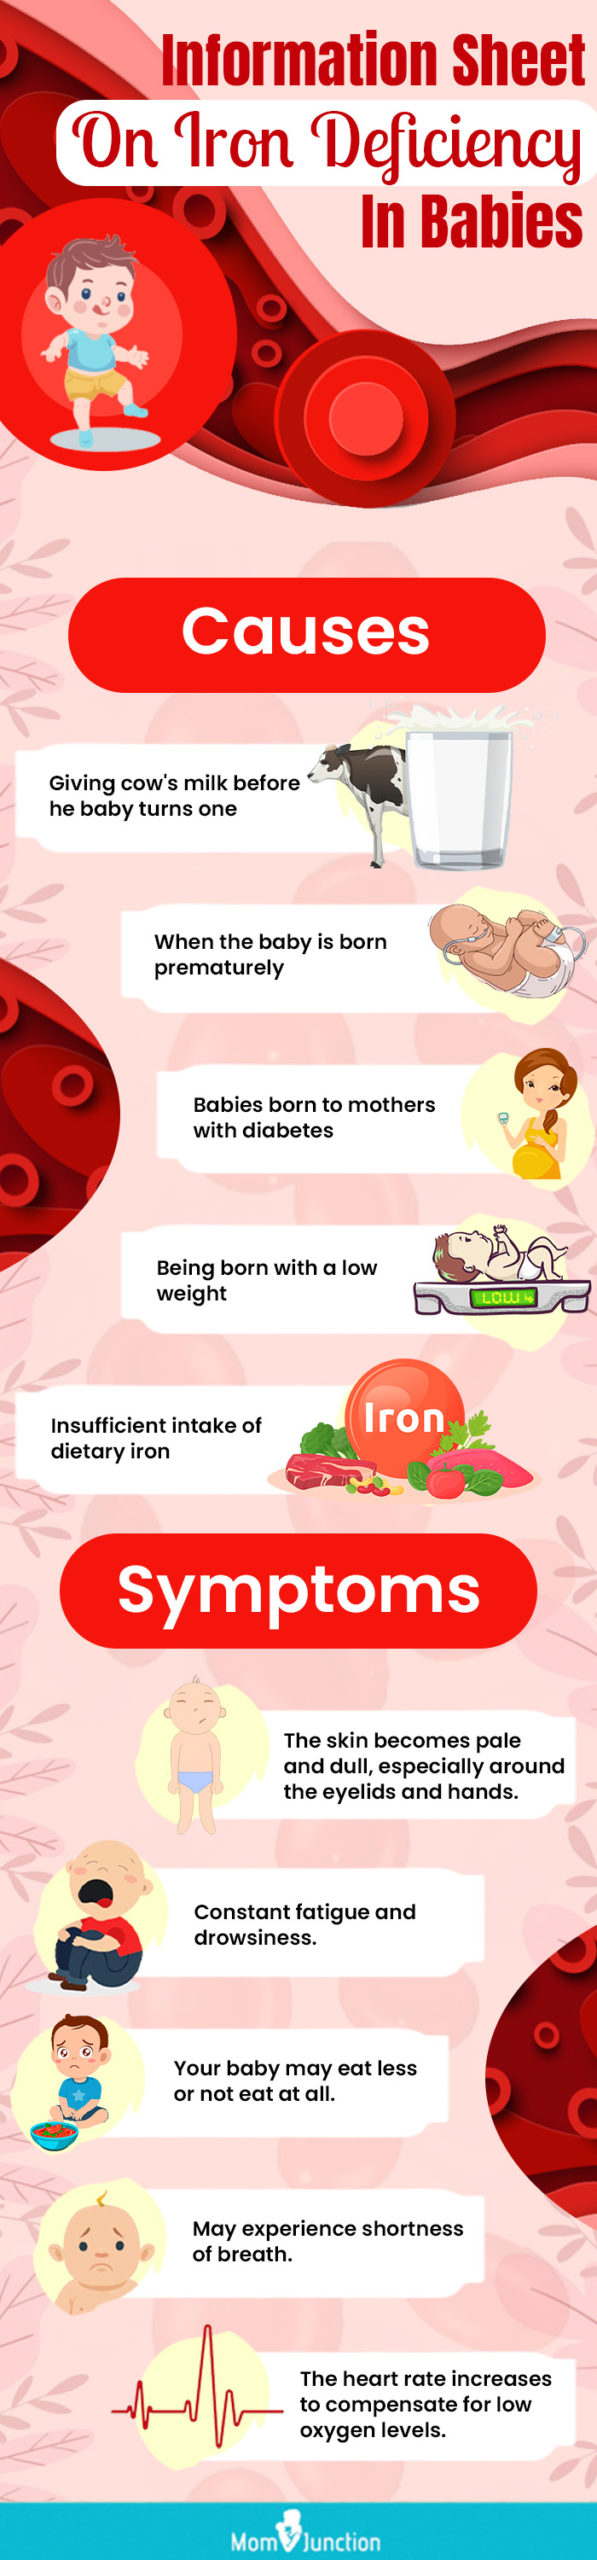 iron deficiency in babies-recovered (infographic)